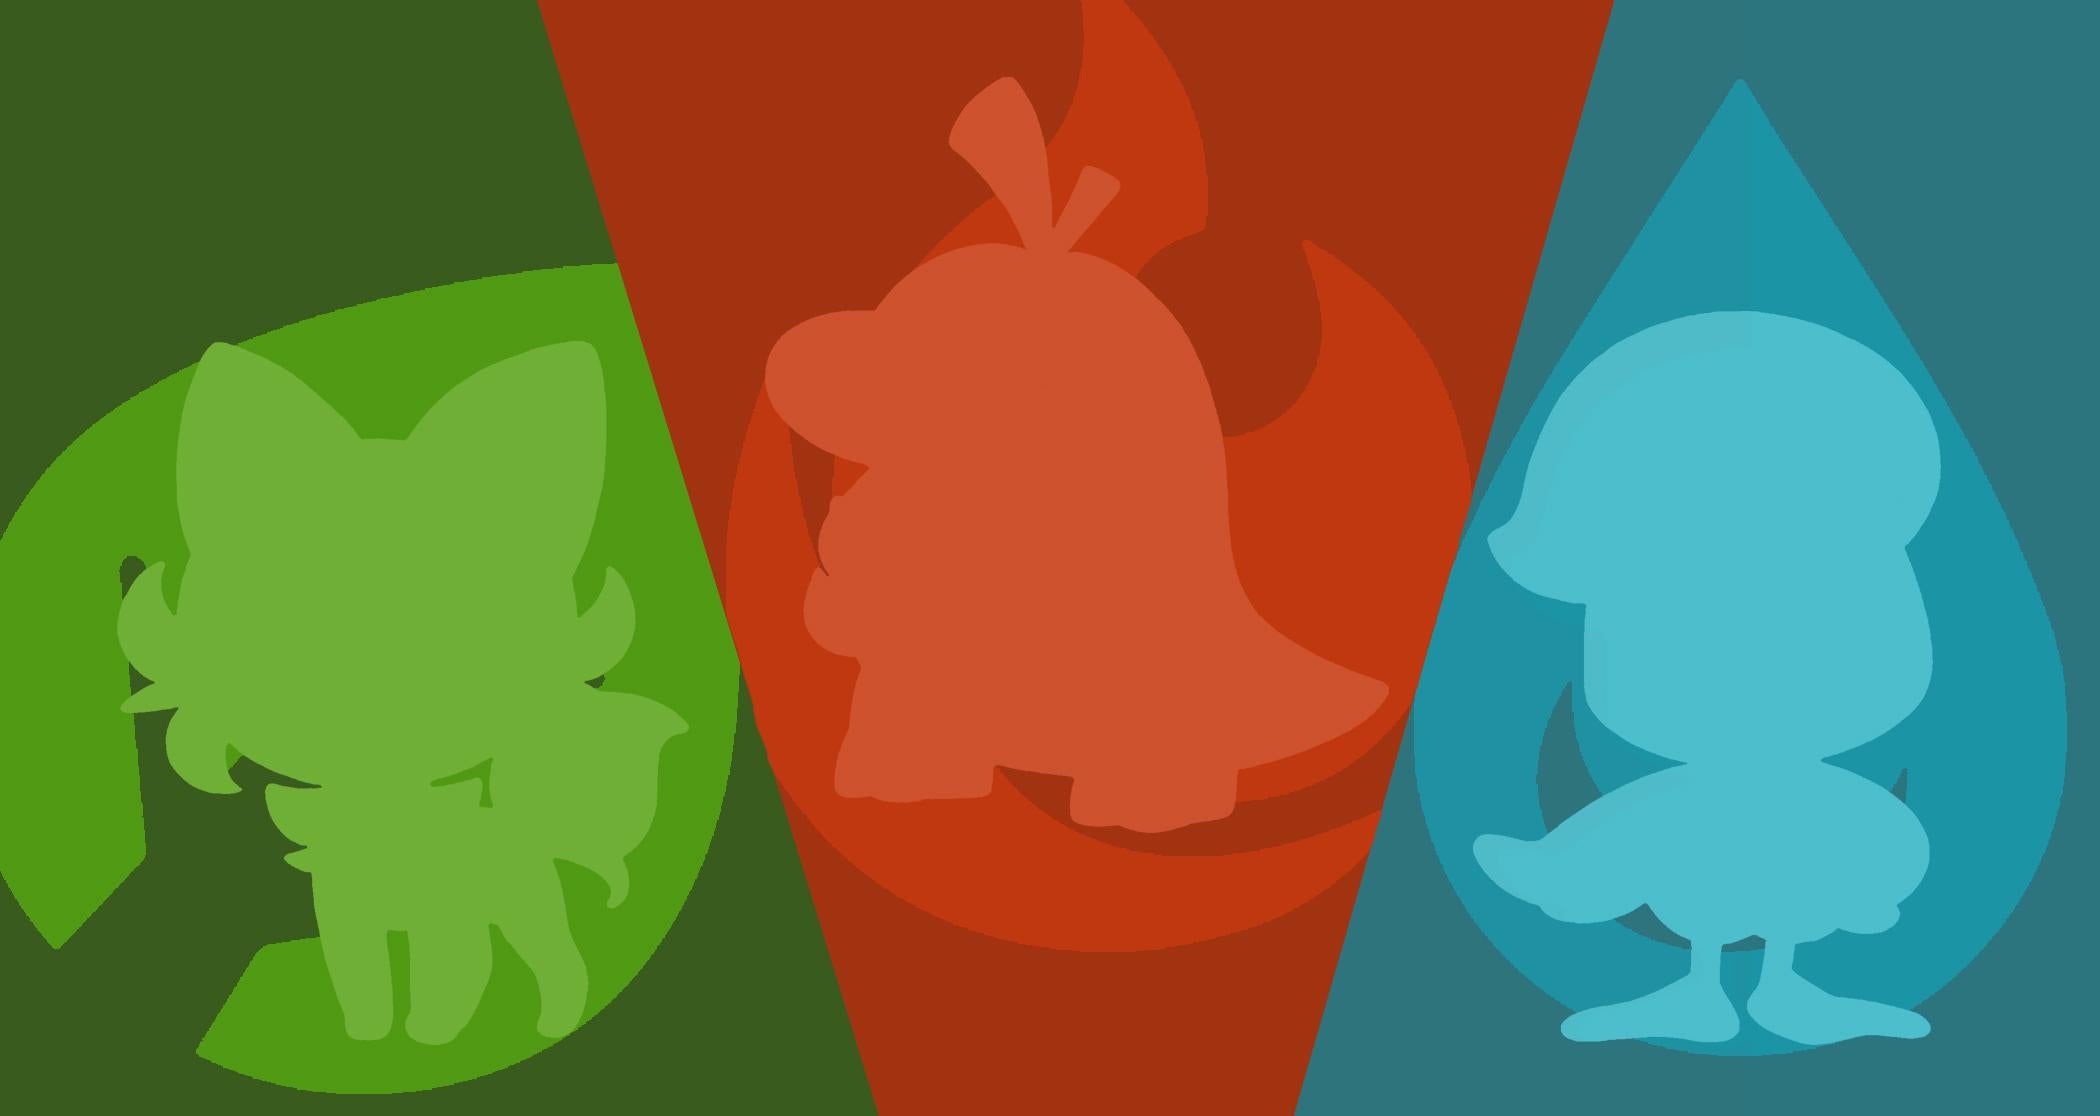 Made some background with the new gen 9 starters